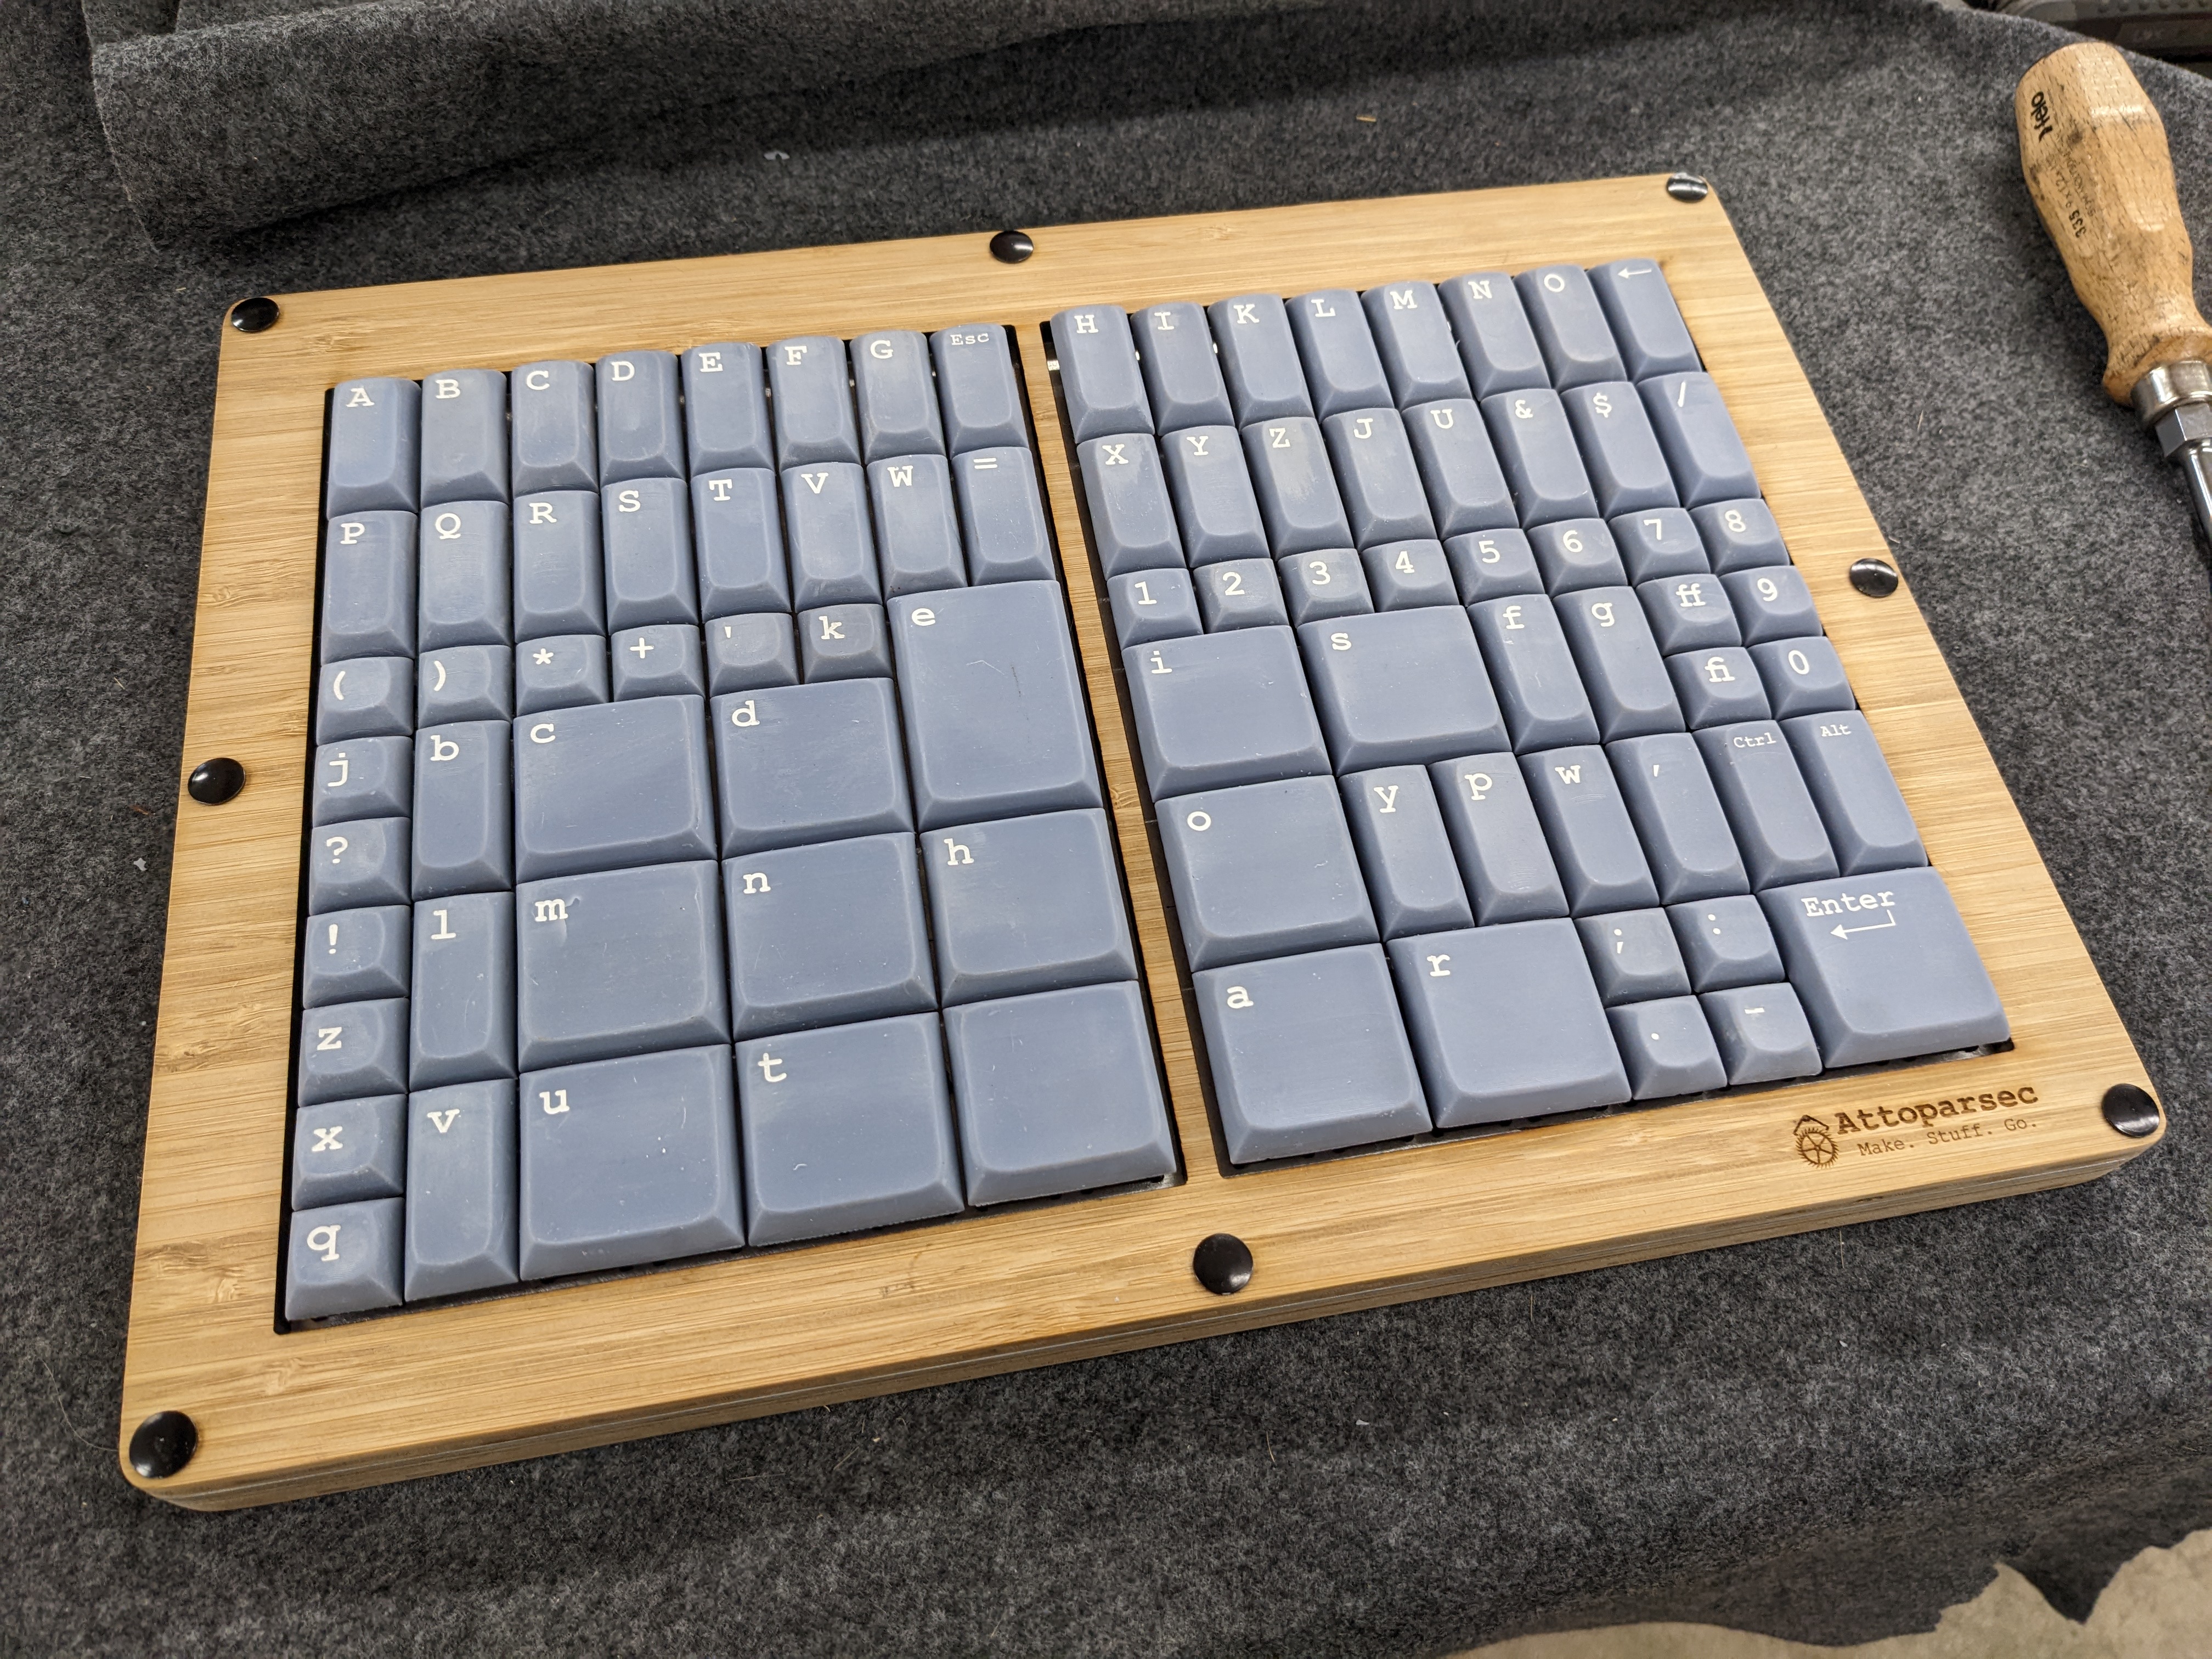 A keyboard built in a laser-cut wood enclosure. It is much more square in aspect ration than a normal keyboard, and not all the keys are the same size.